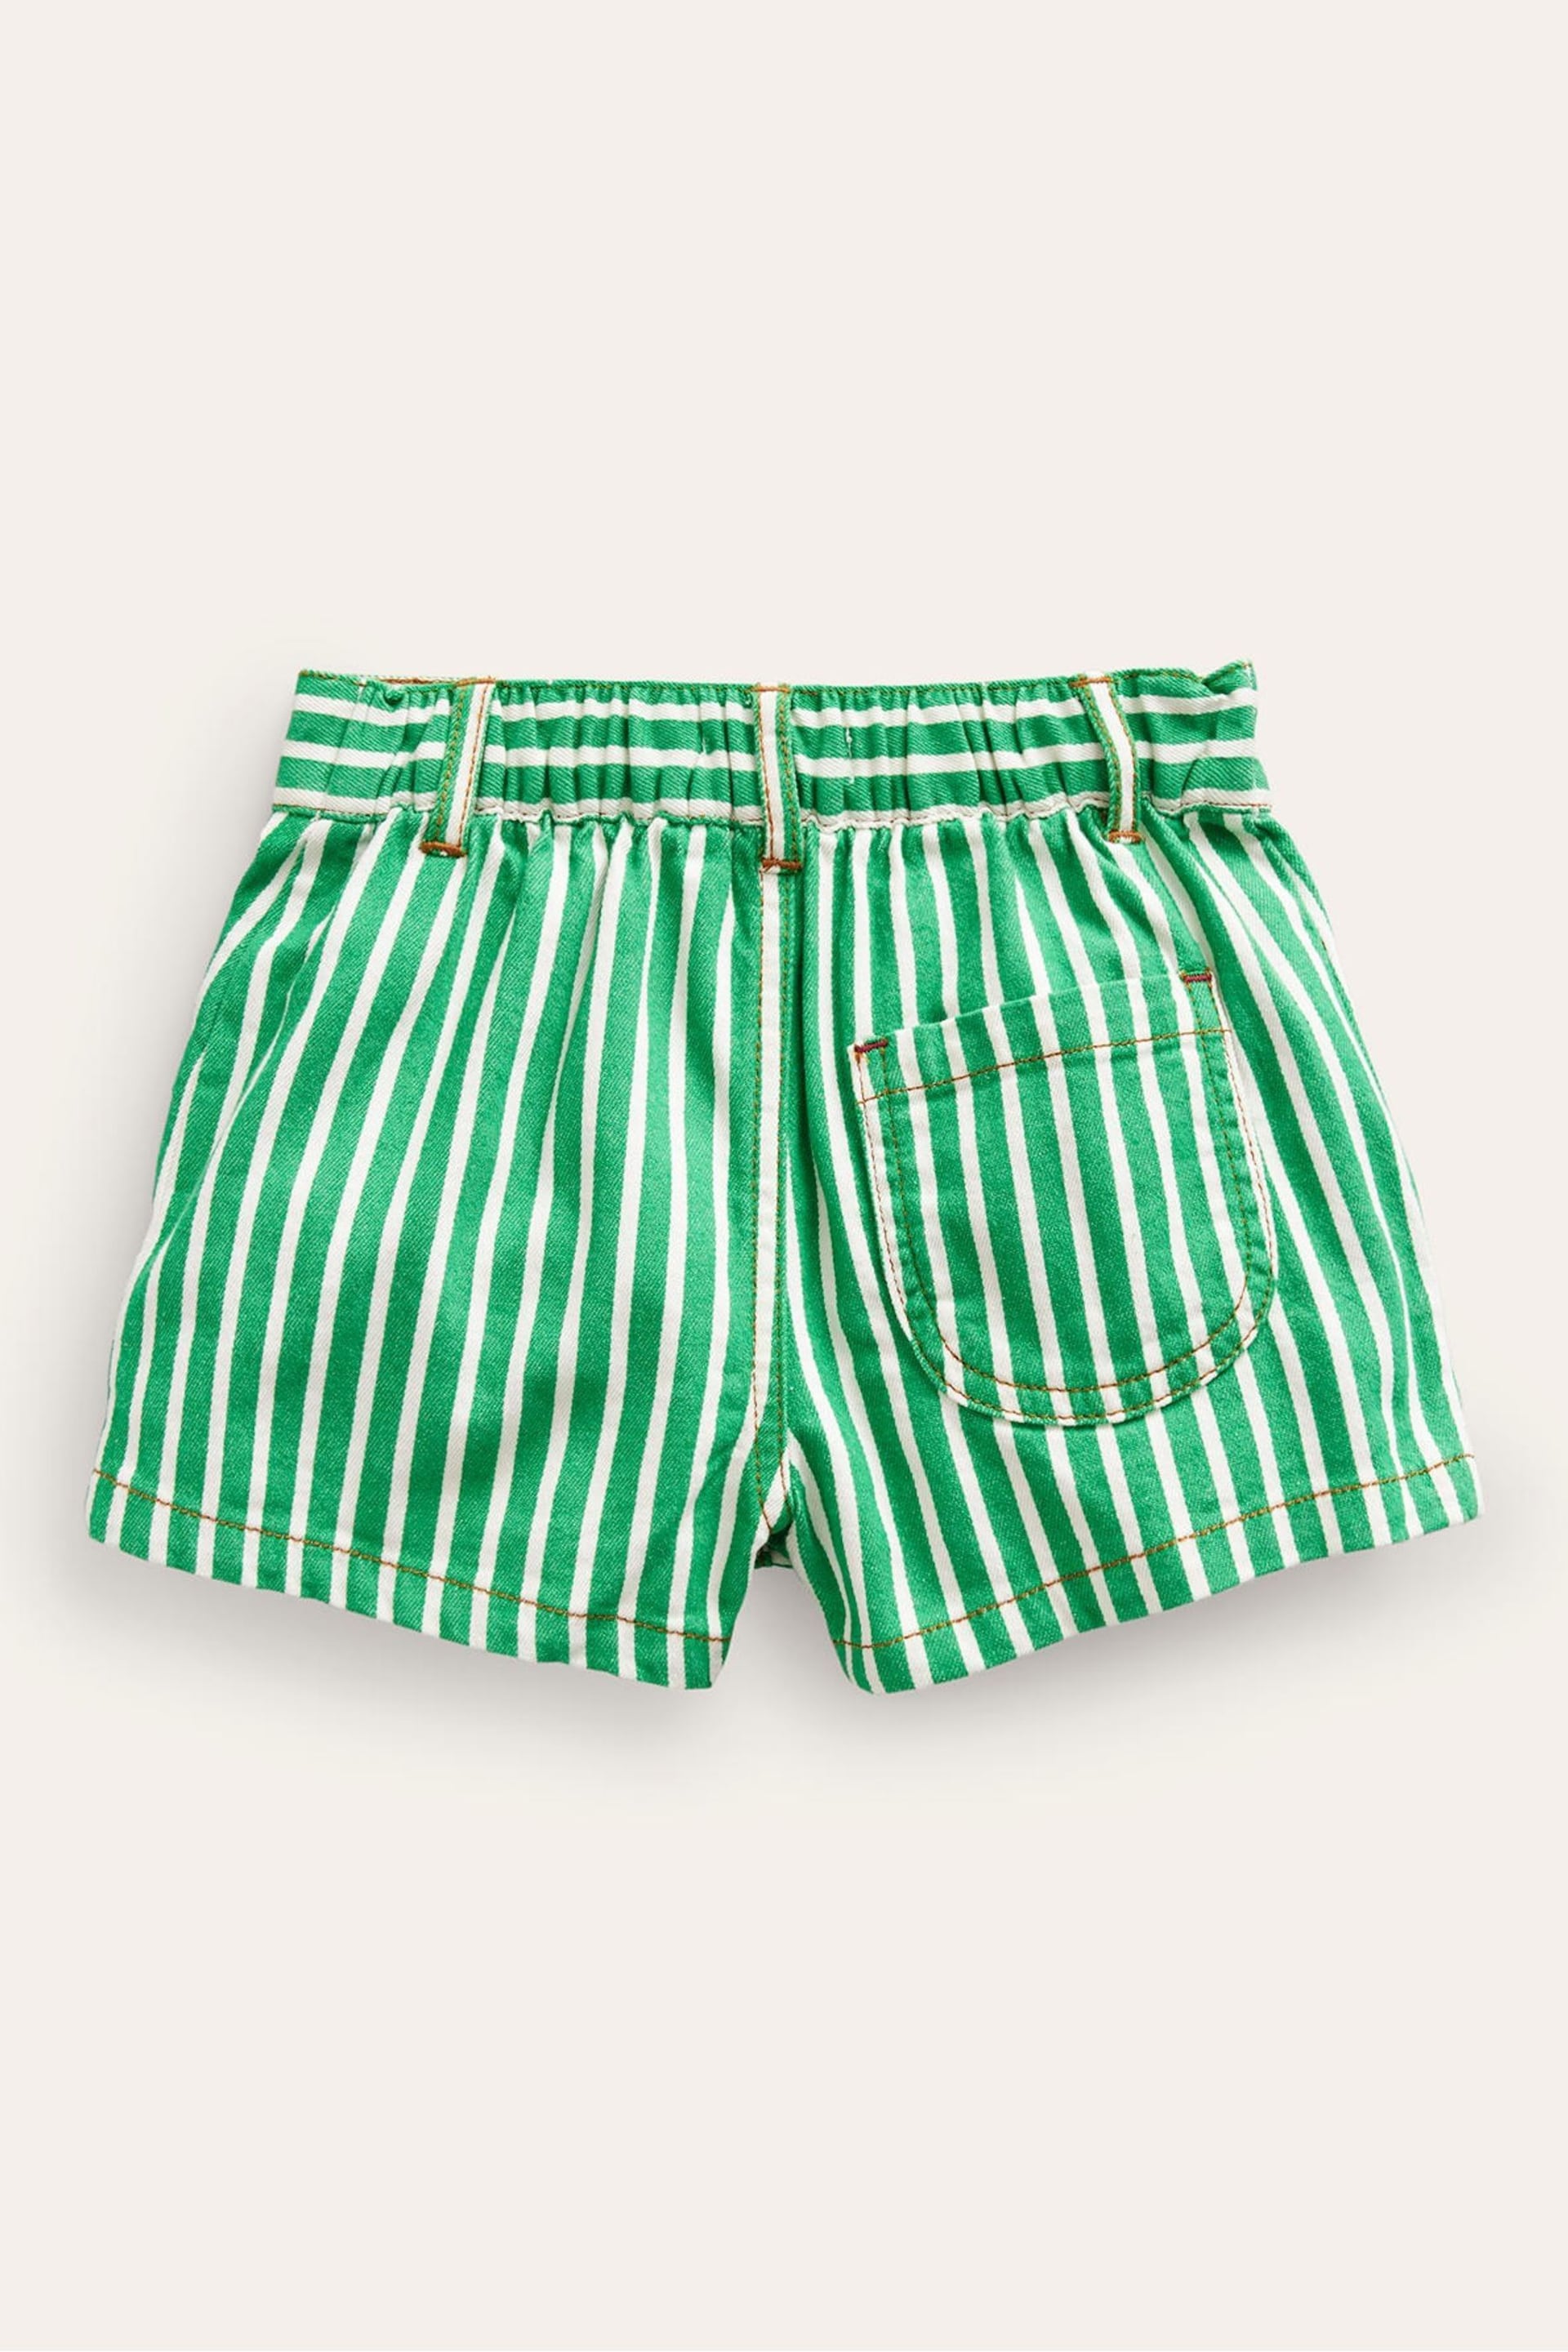 Boden Green Patch Pocket Shorts - Image 2 of 3